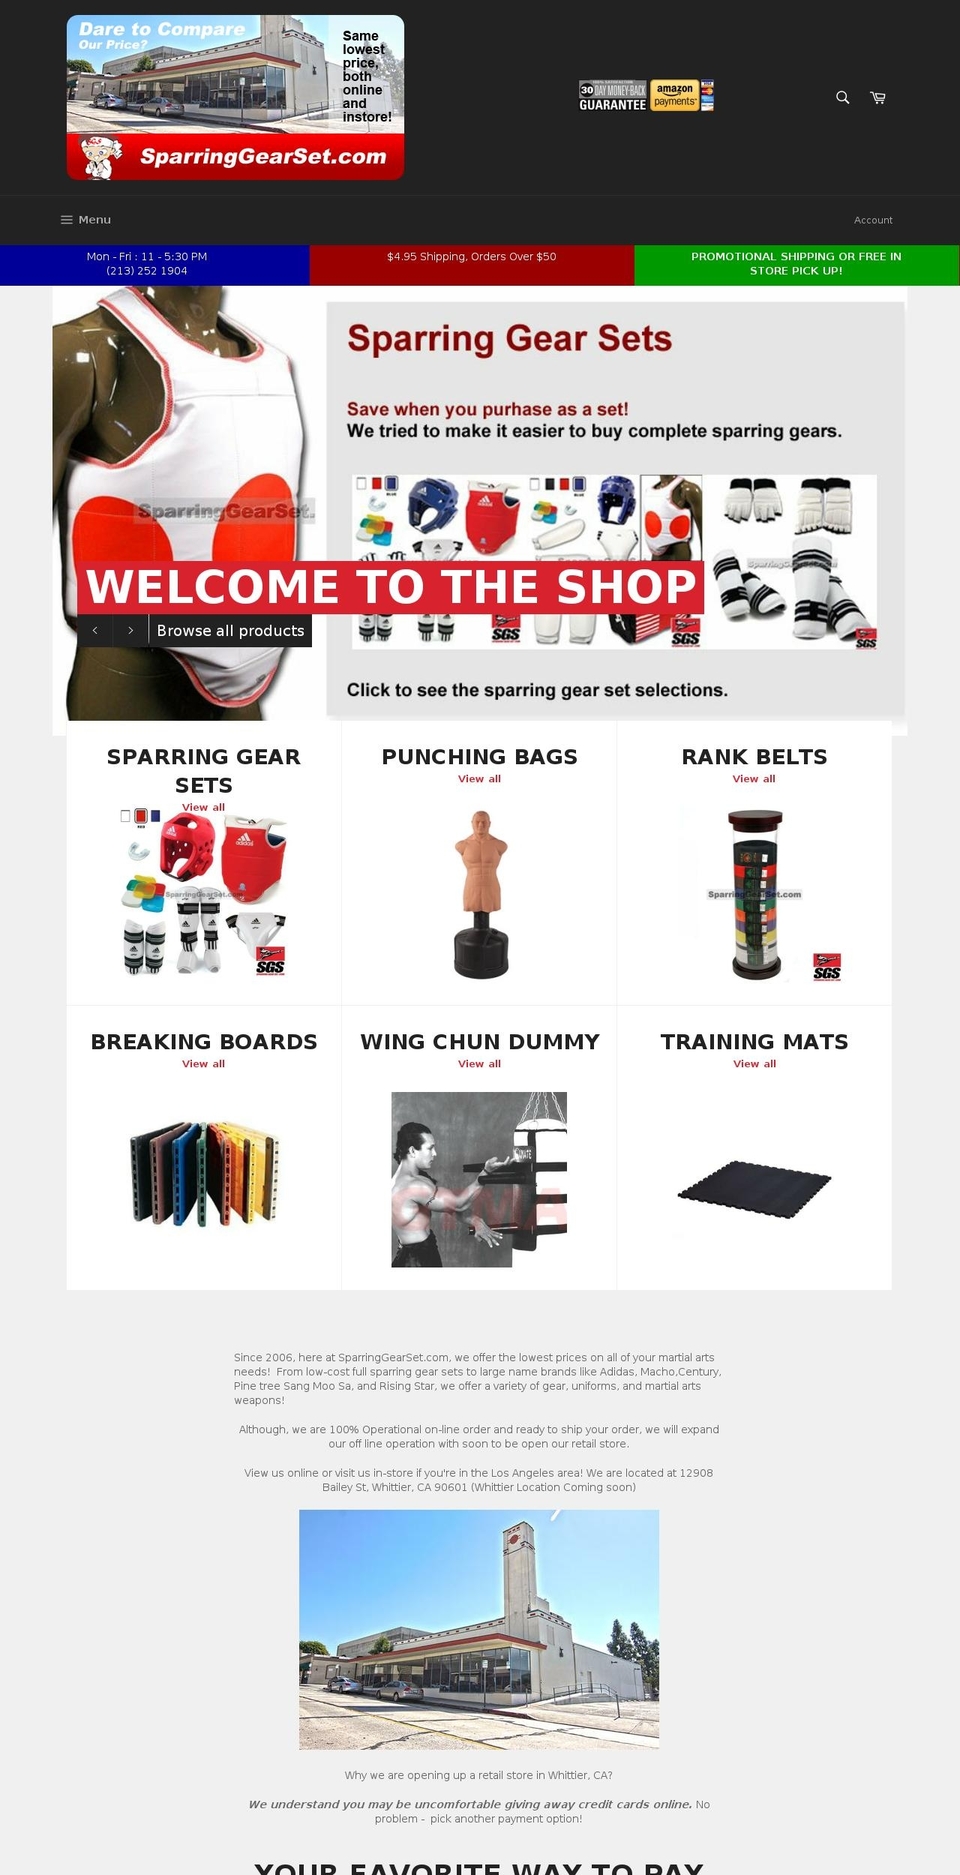 Refresh Shopify theme site example sparringgearset.com